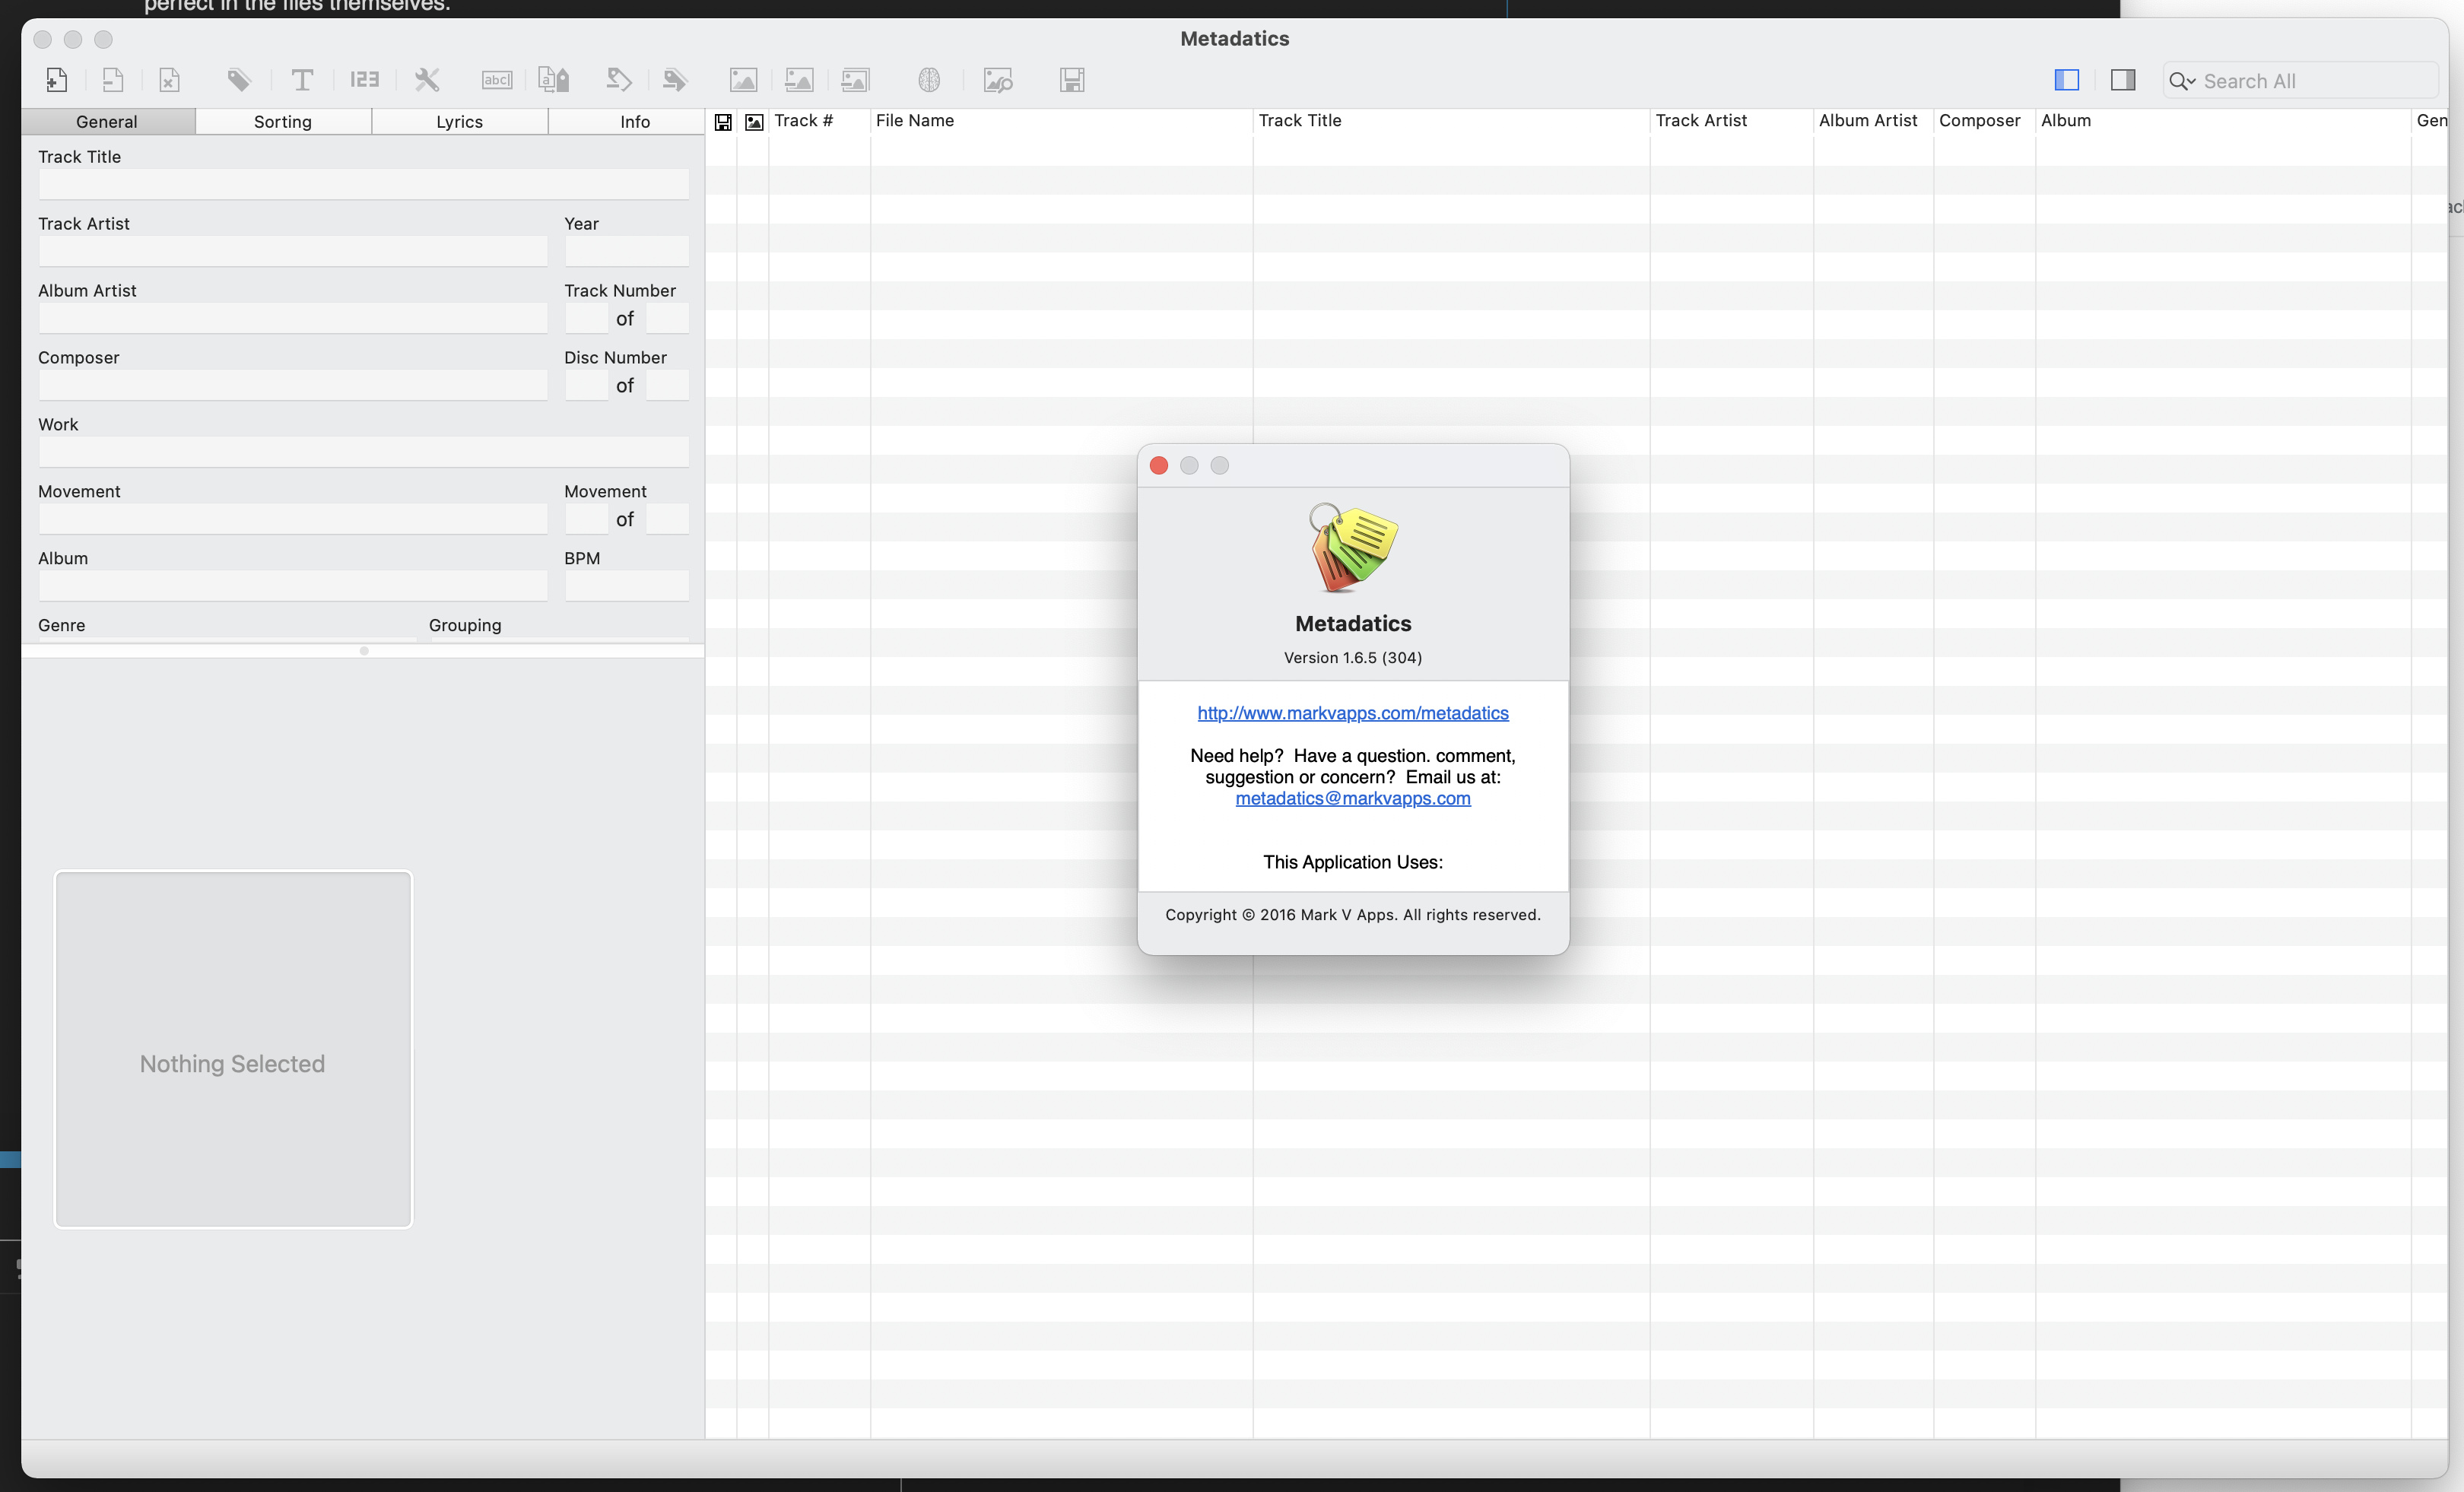 download the last version for apple EZ Meta Tag Editor 3.3.0.1